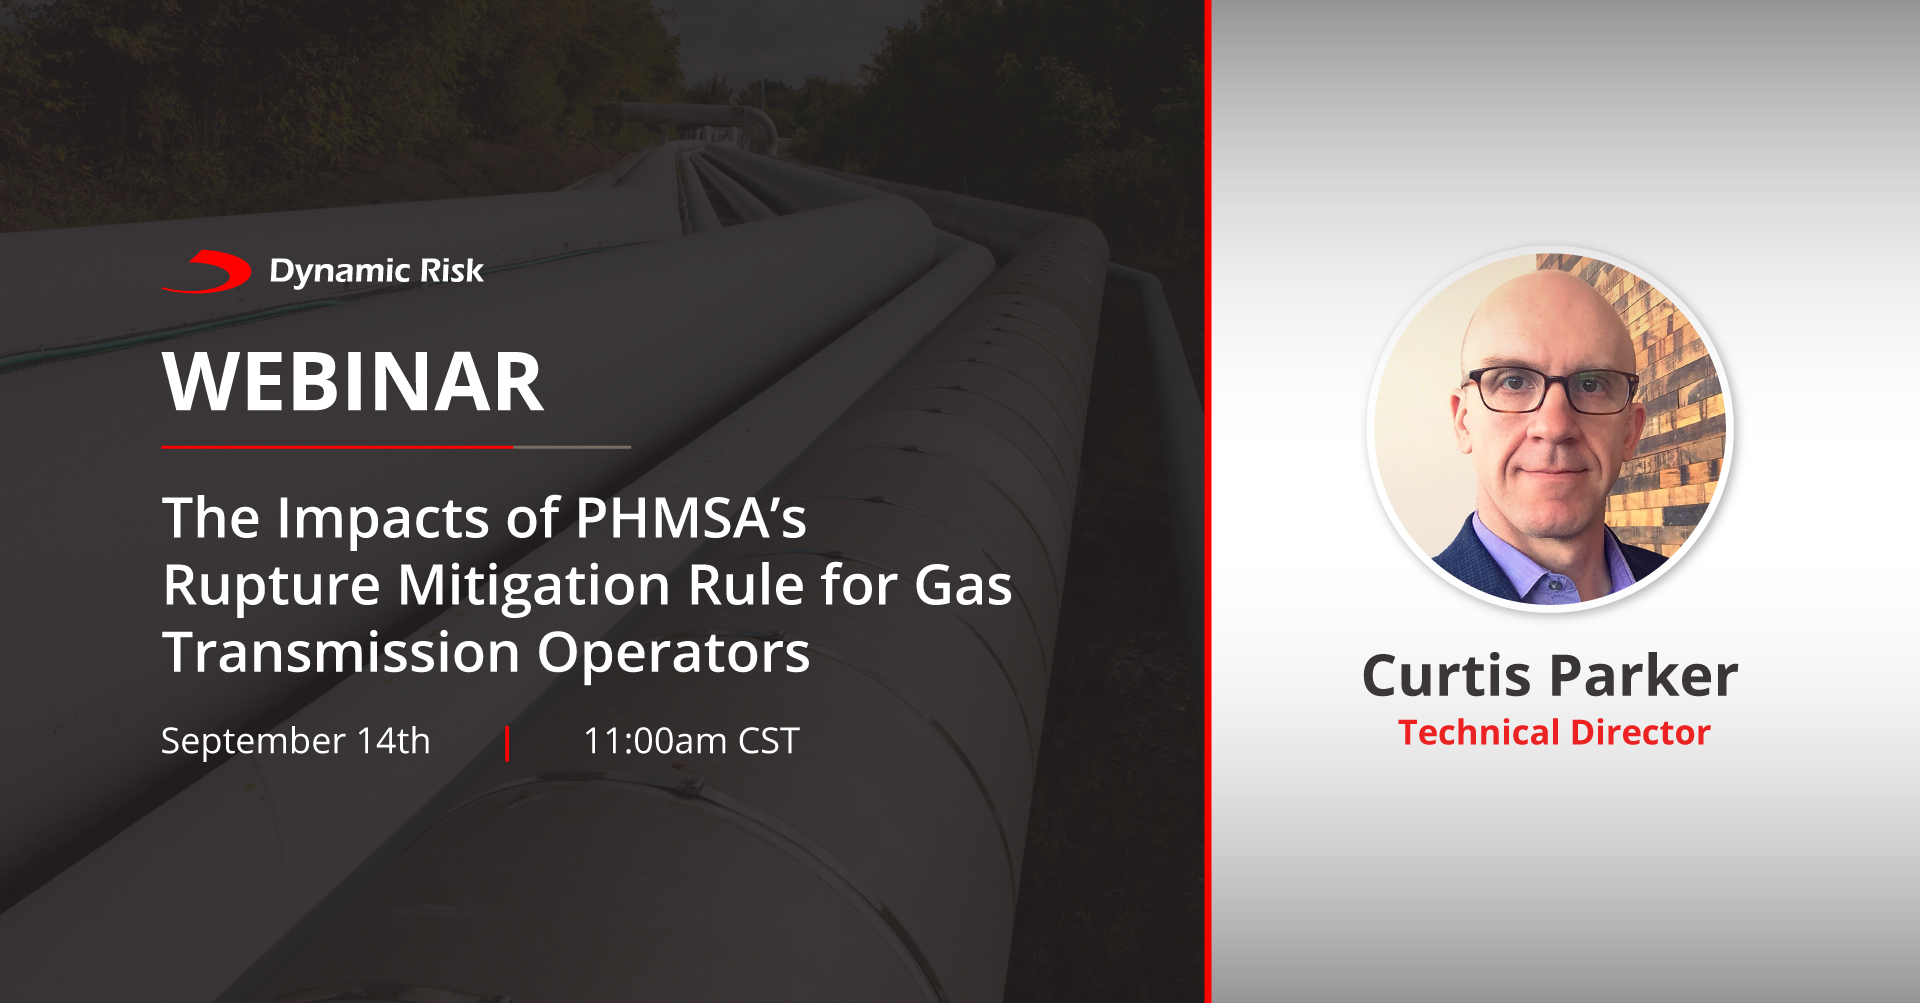 Webinar: The Impacts of PHMSA’s Rupture Mitigation Rule for Gas Transmission Operators